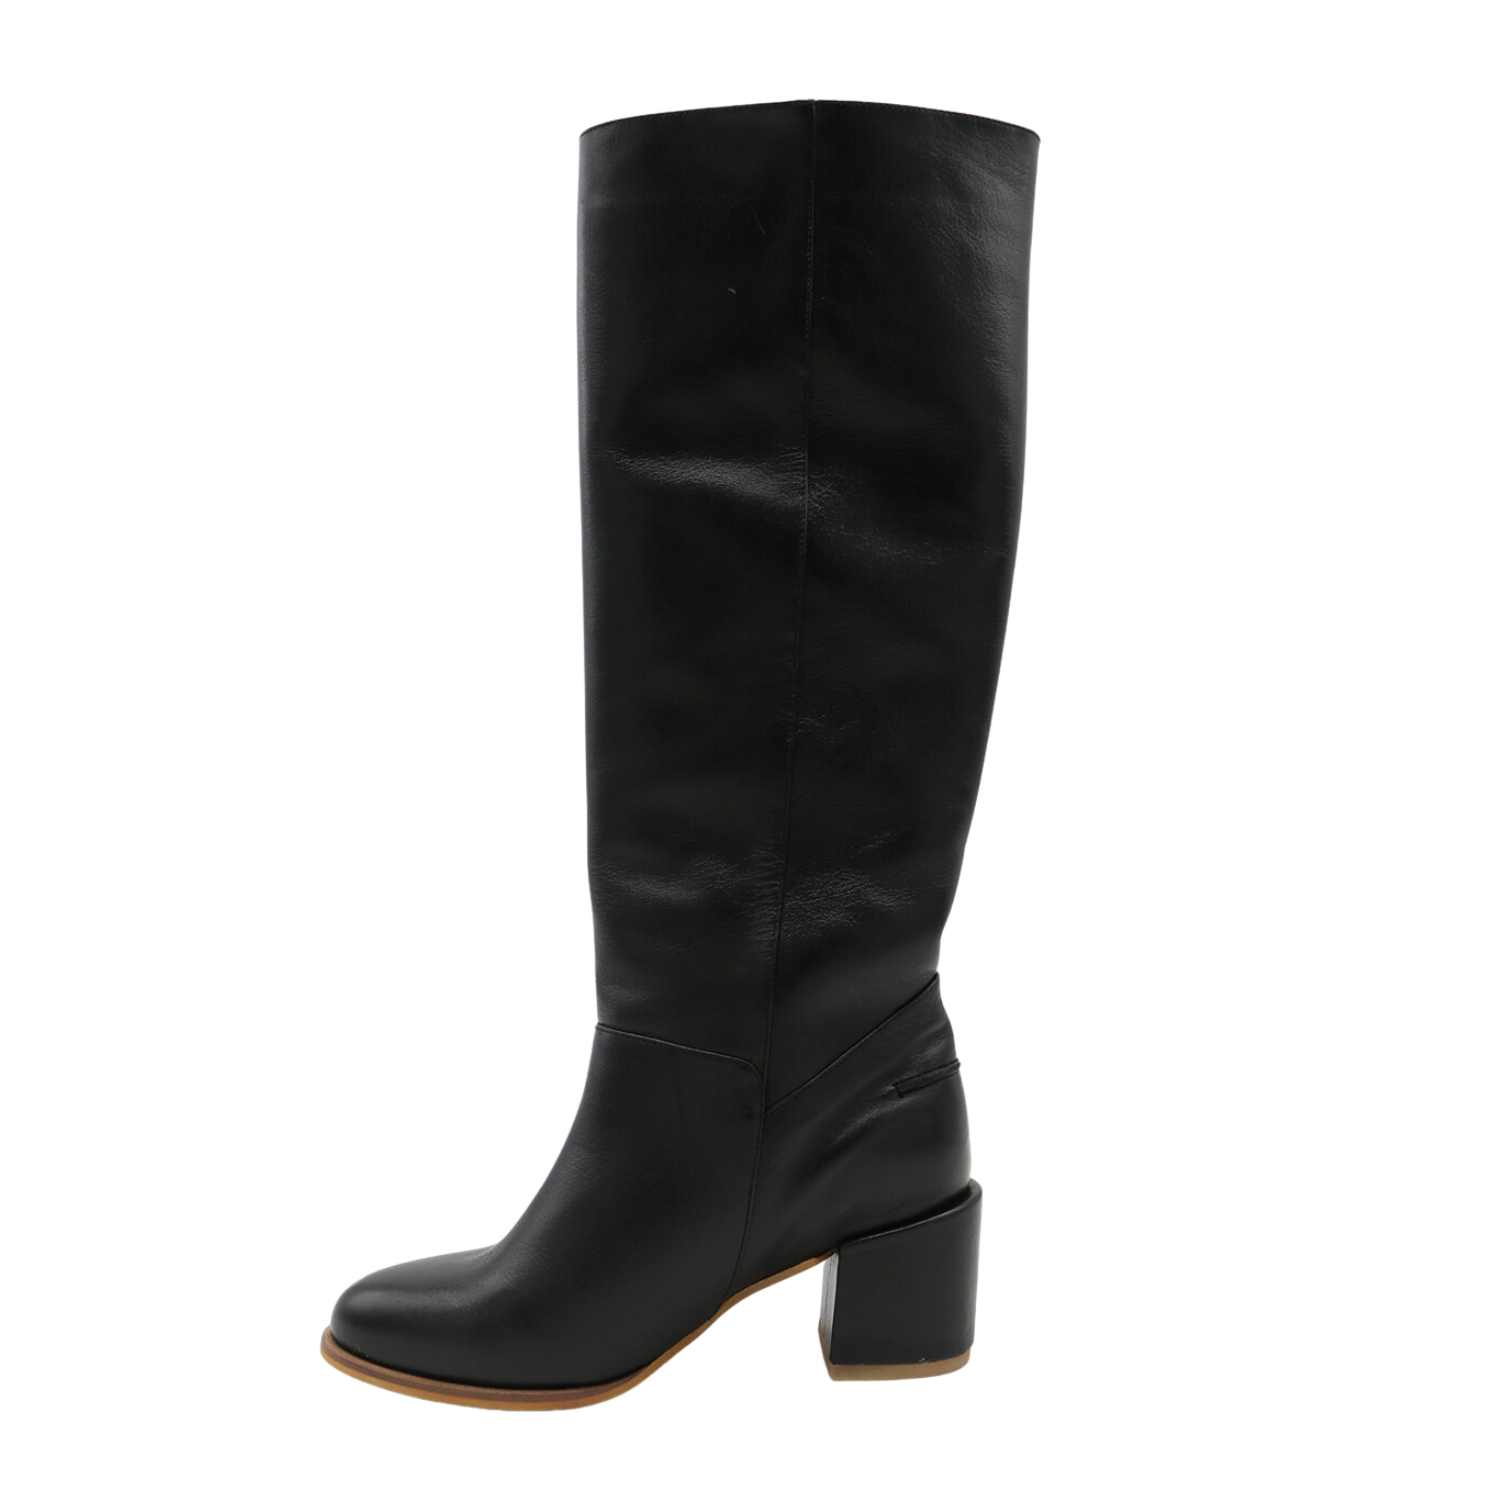 Women’s Cléo Knee High Boots In Black Leather 4 Uk Stivali New York